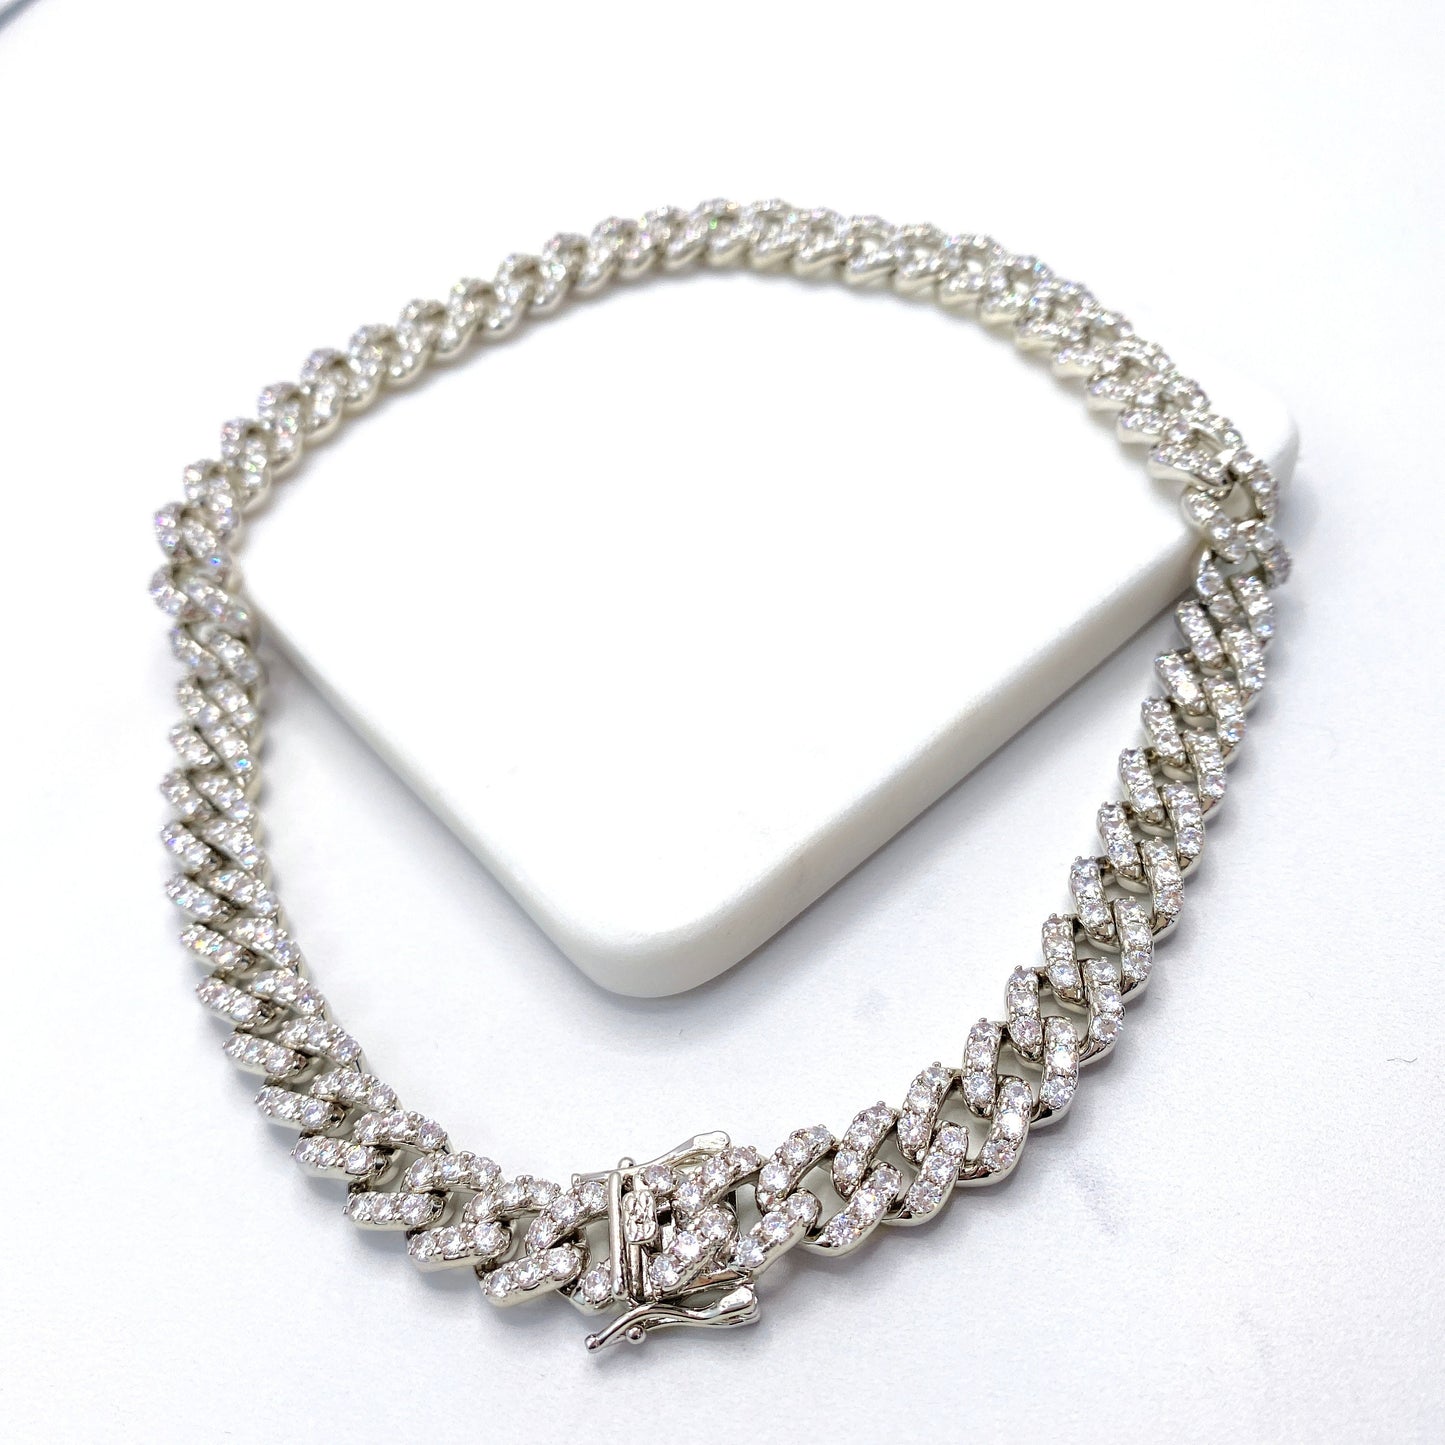 14k Gold Filled 10mm Iced Miami Cuban Chain Featuring Double Safety Lock Box Cubic Zirconia, Silver Chain or Bracelet, Wholesale Jewelry